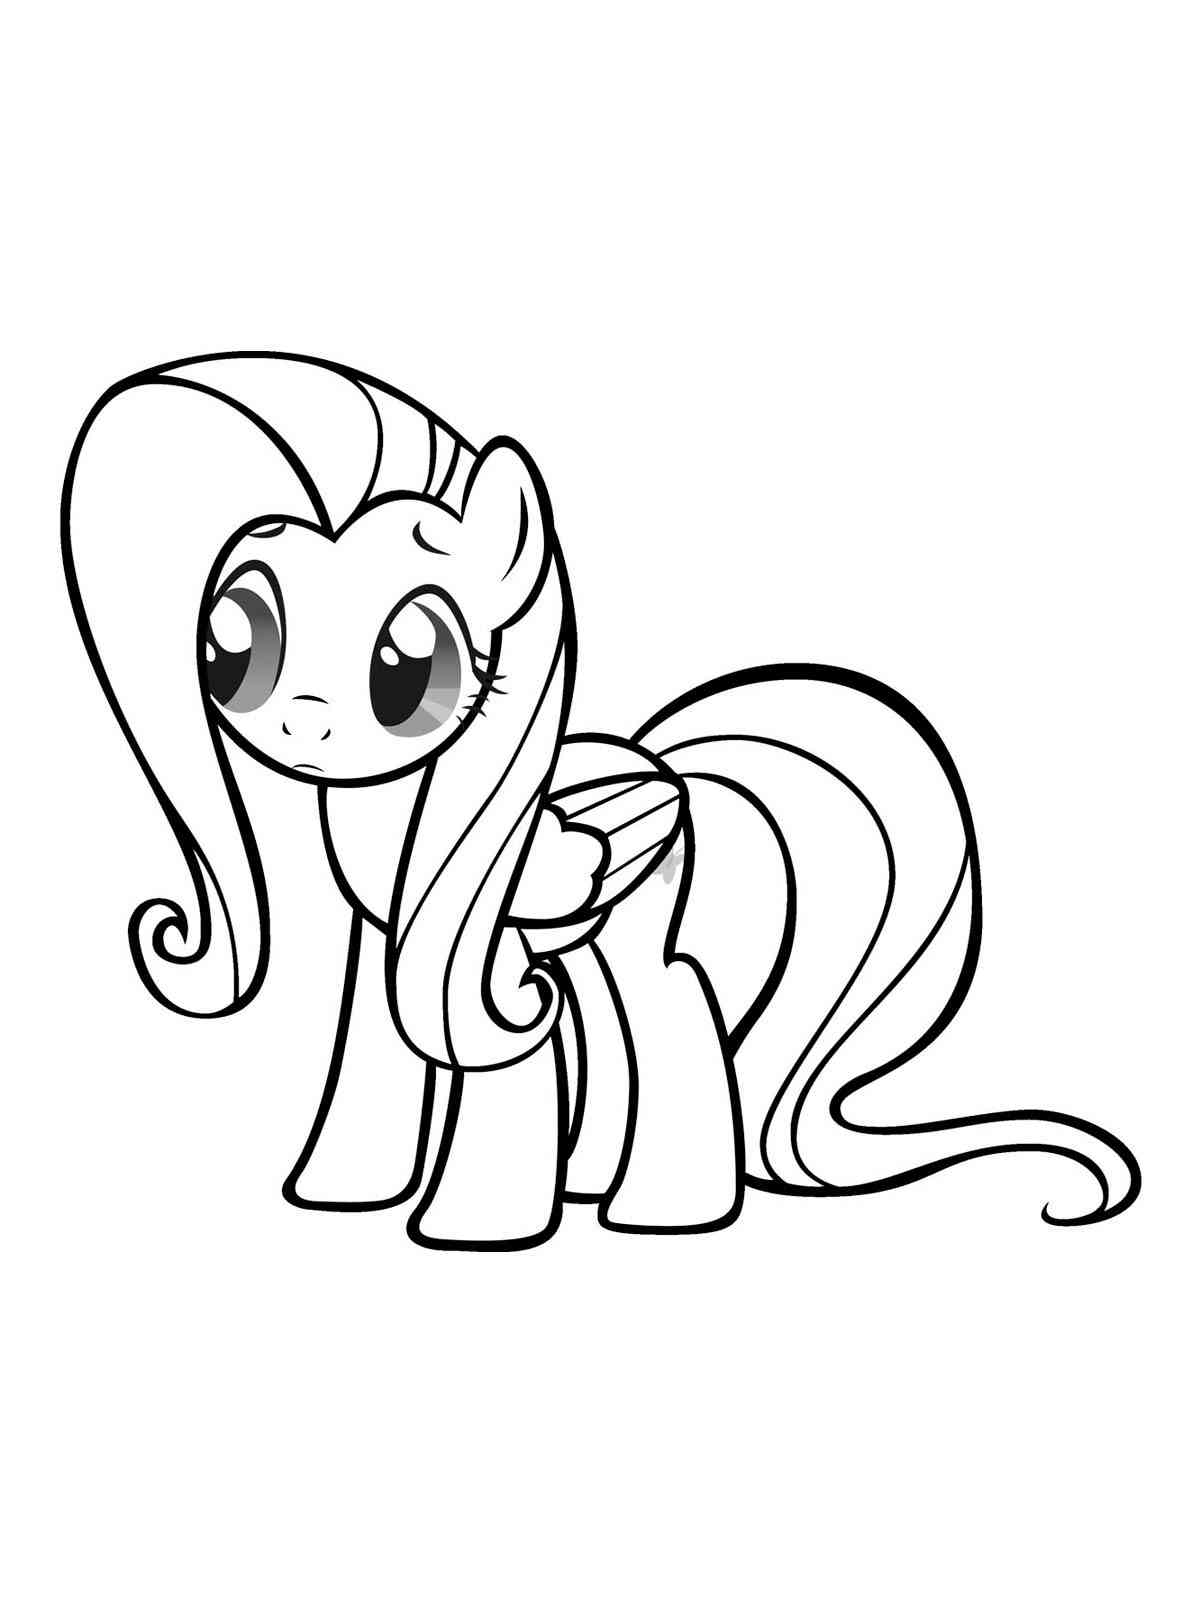 Fluttershy 7 coloring page